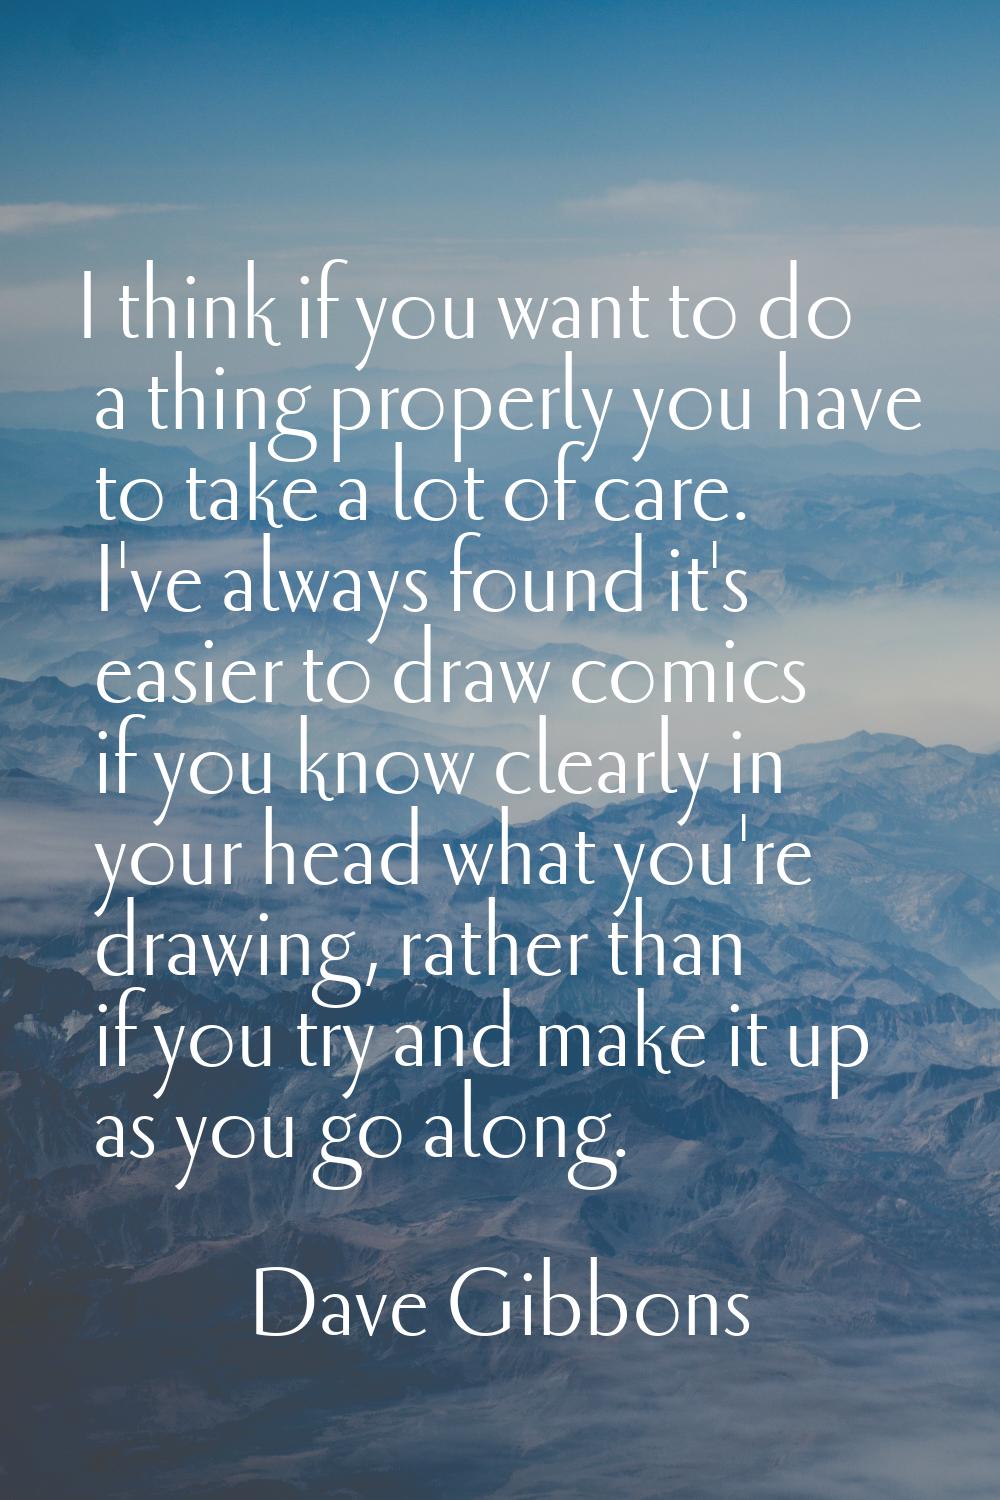 I think if you want to do a thing properly you have to take a lot of care. I've always found it's e